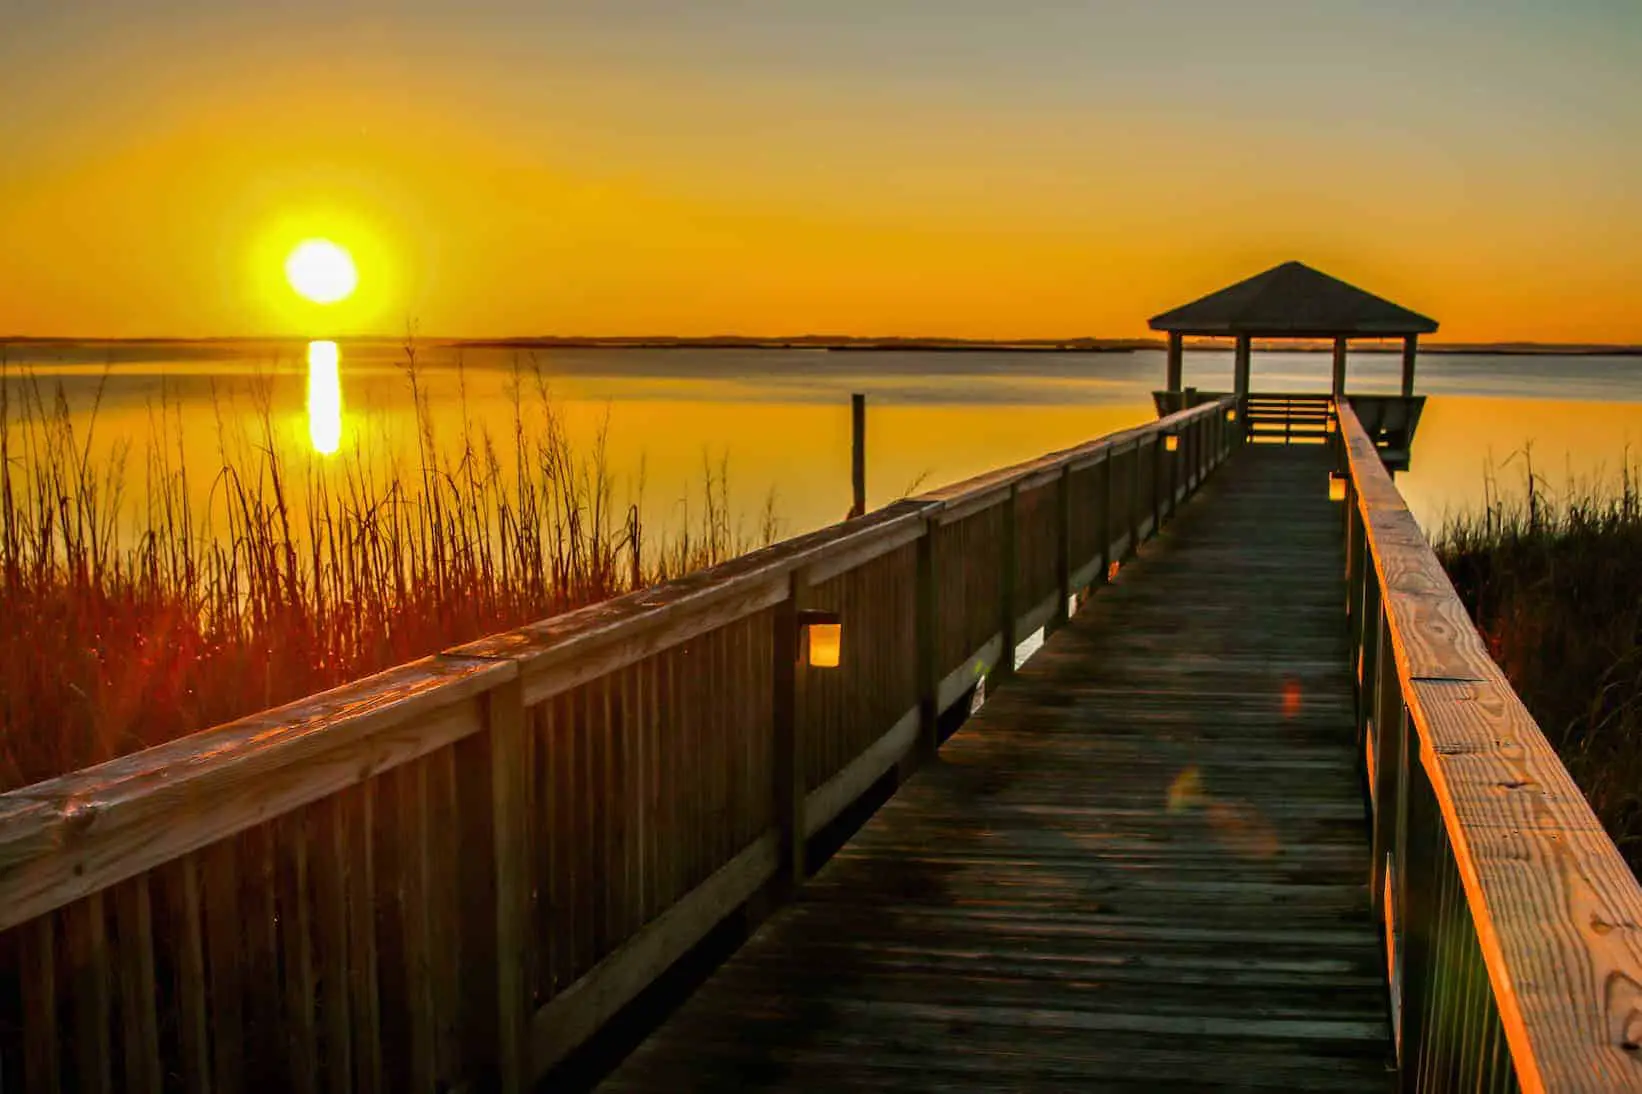 Sunset in Outer Banks, North Carolina | Southern States Road Trip | #DeepSouth #OBX